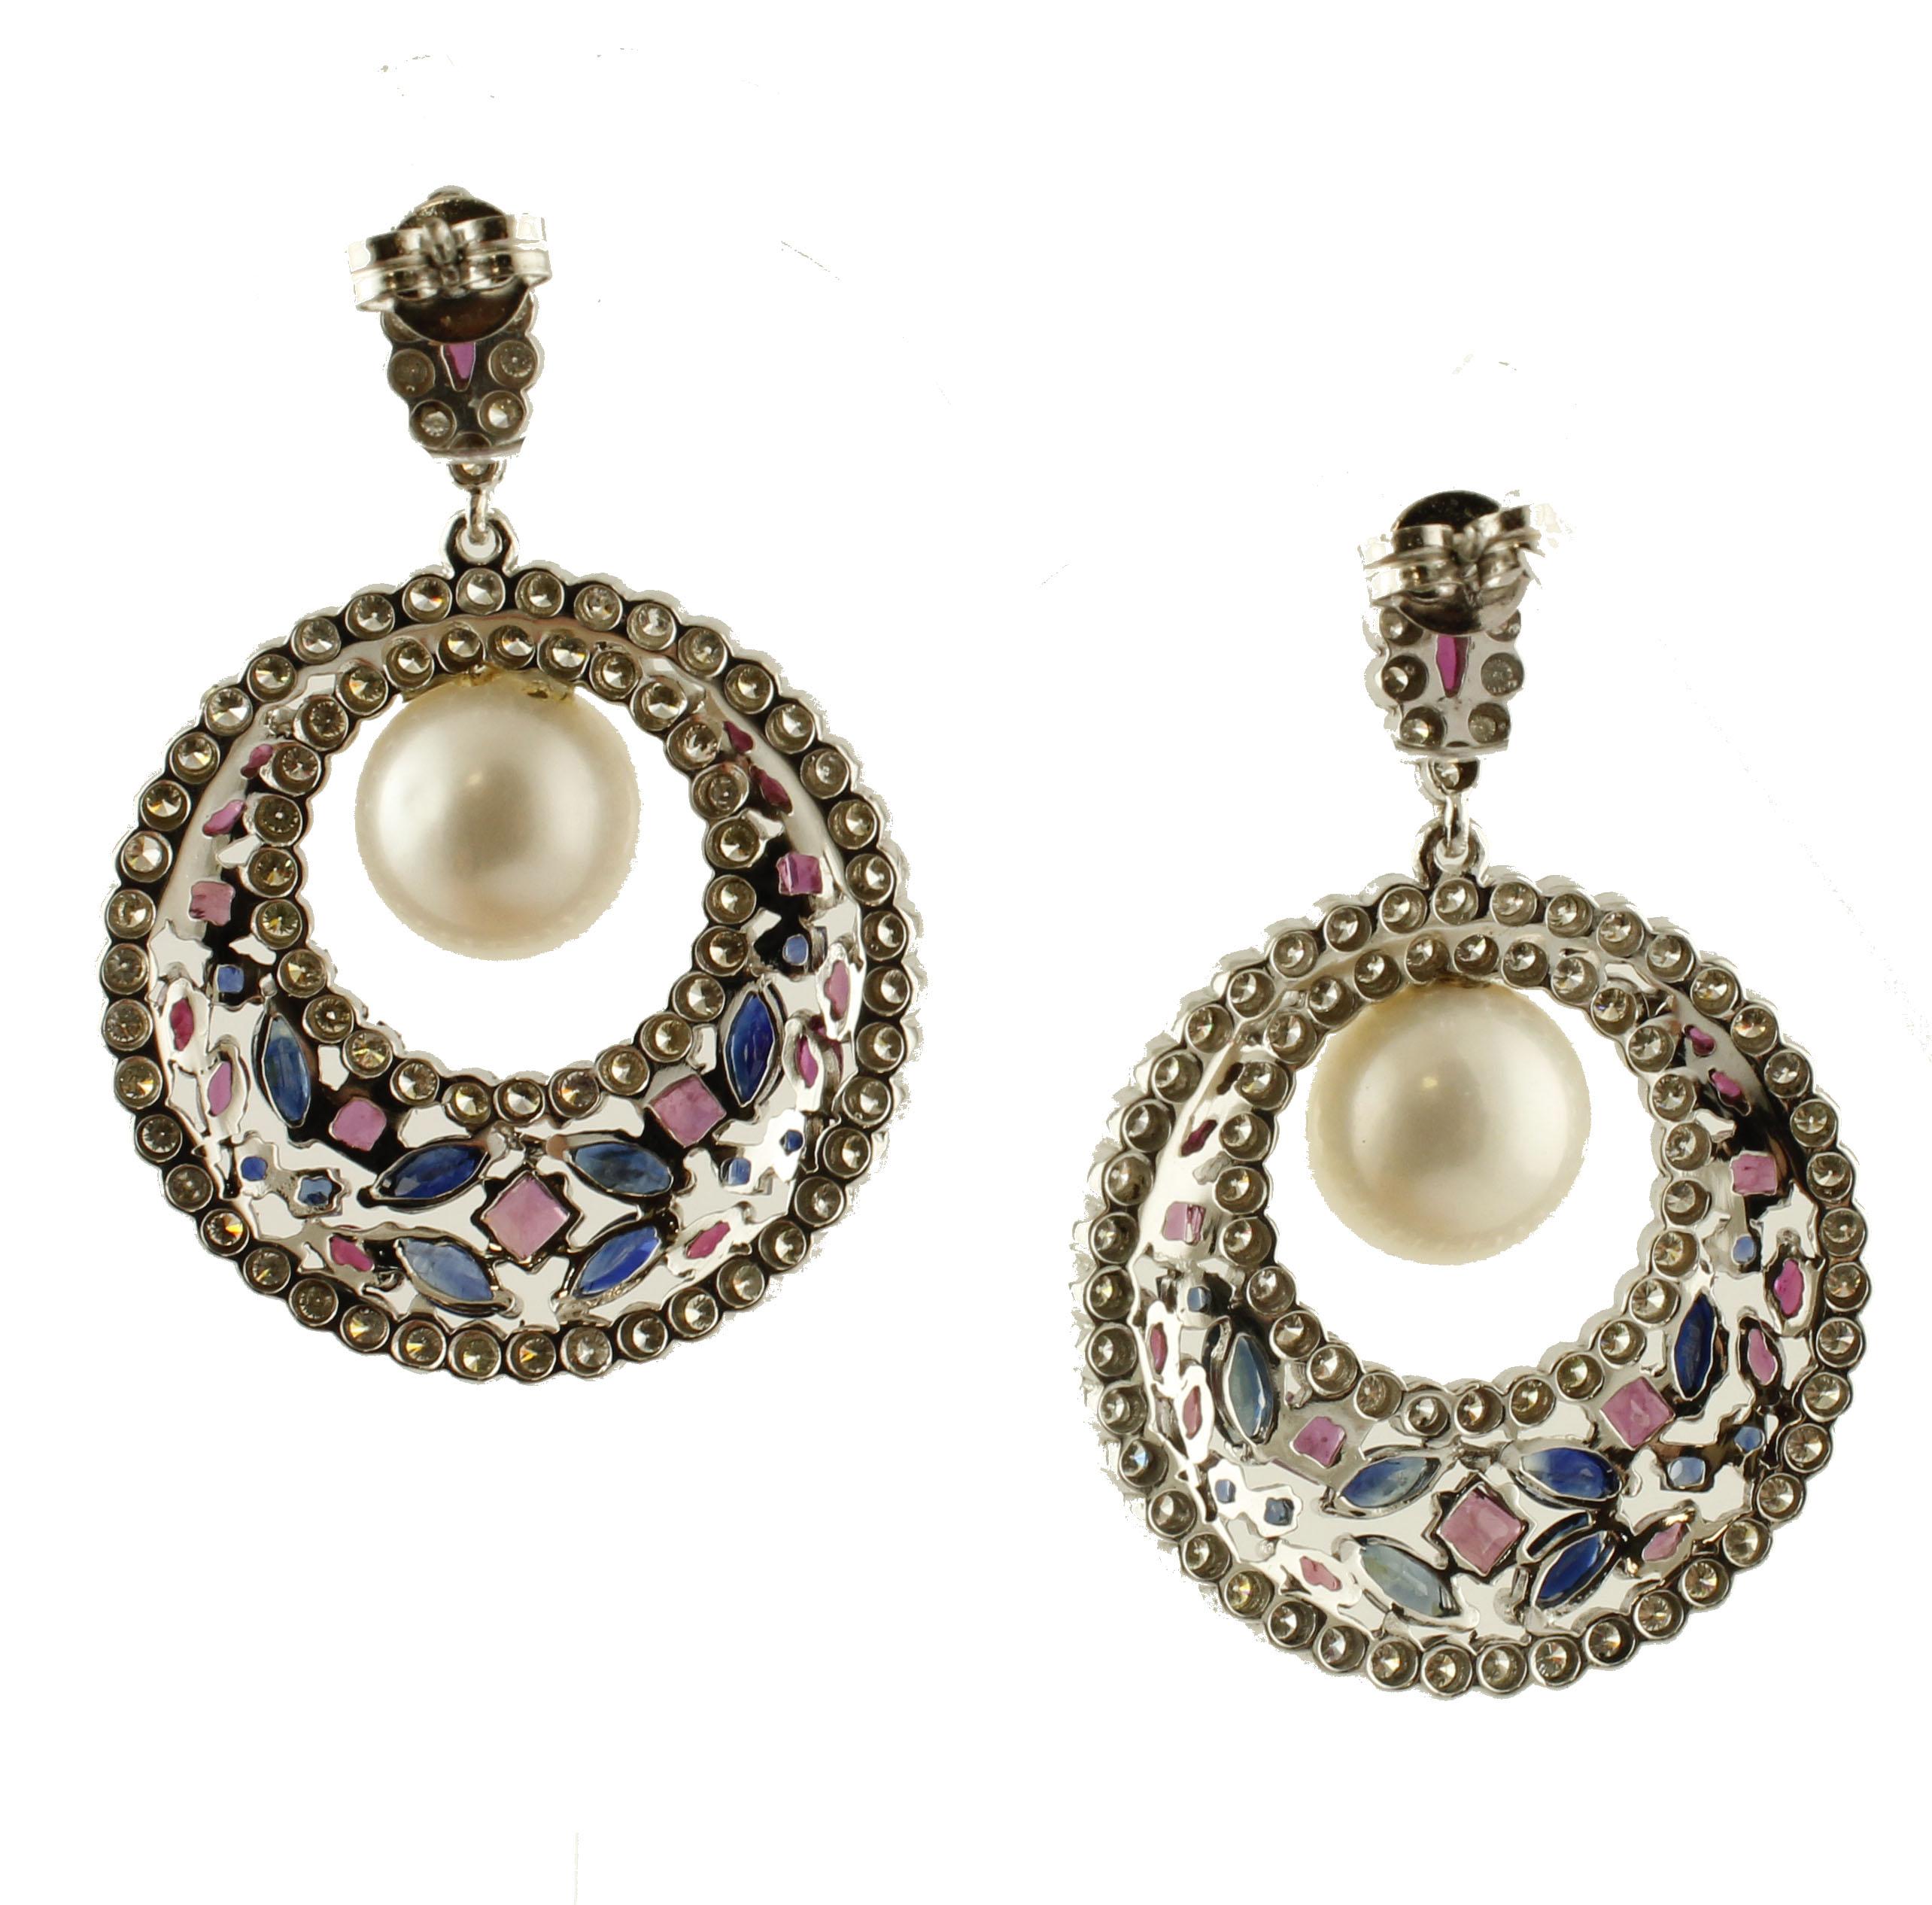 Precious dangle earrings mounted in 14k white gold structure. The tops -made of little rubies surrounded with diamonds- suspend two pierced circles studded with rubies,blue sapphires and beautiful white diamonds. The two holes hold two beautiful